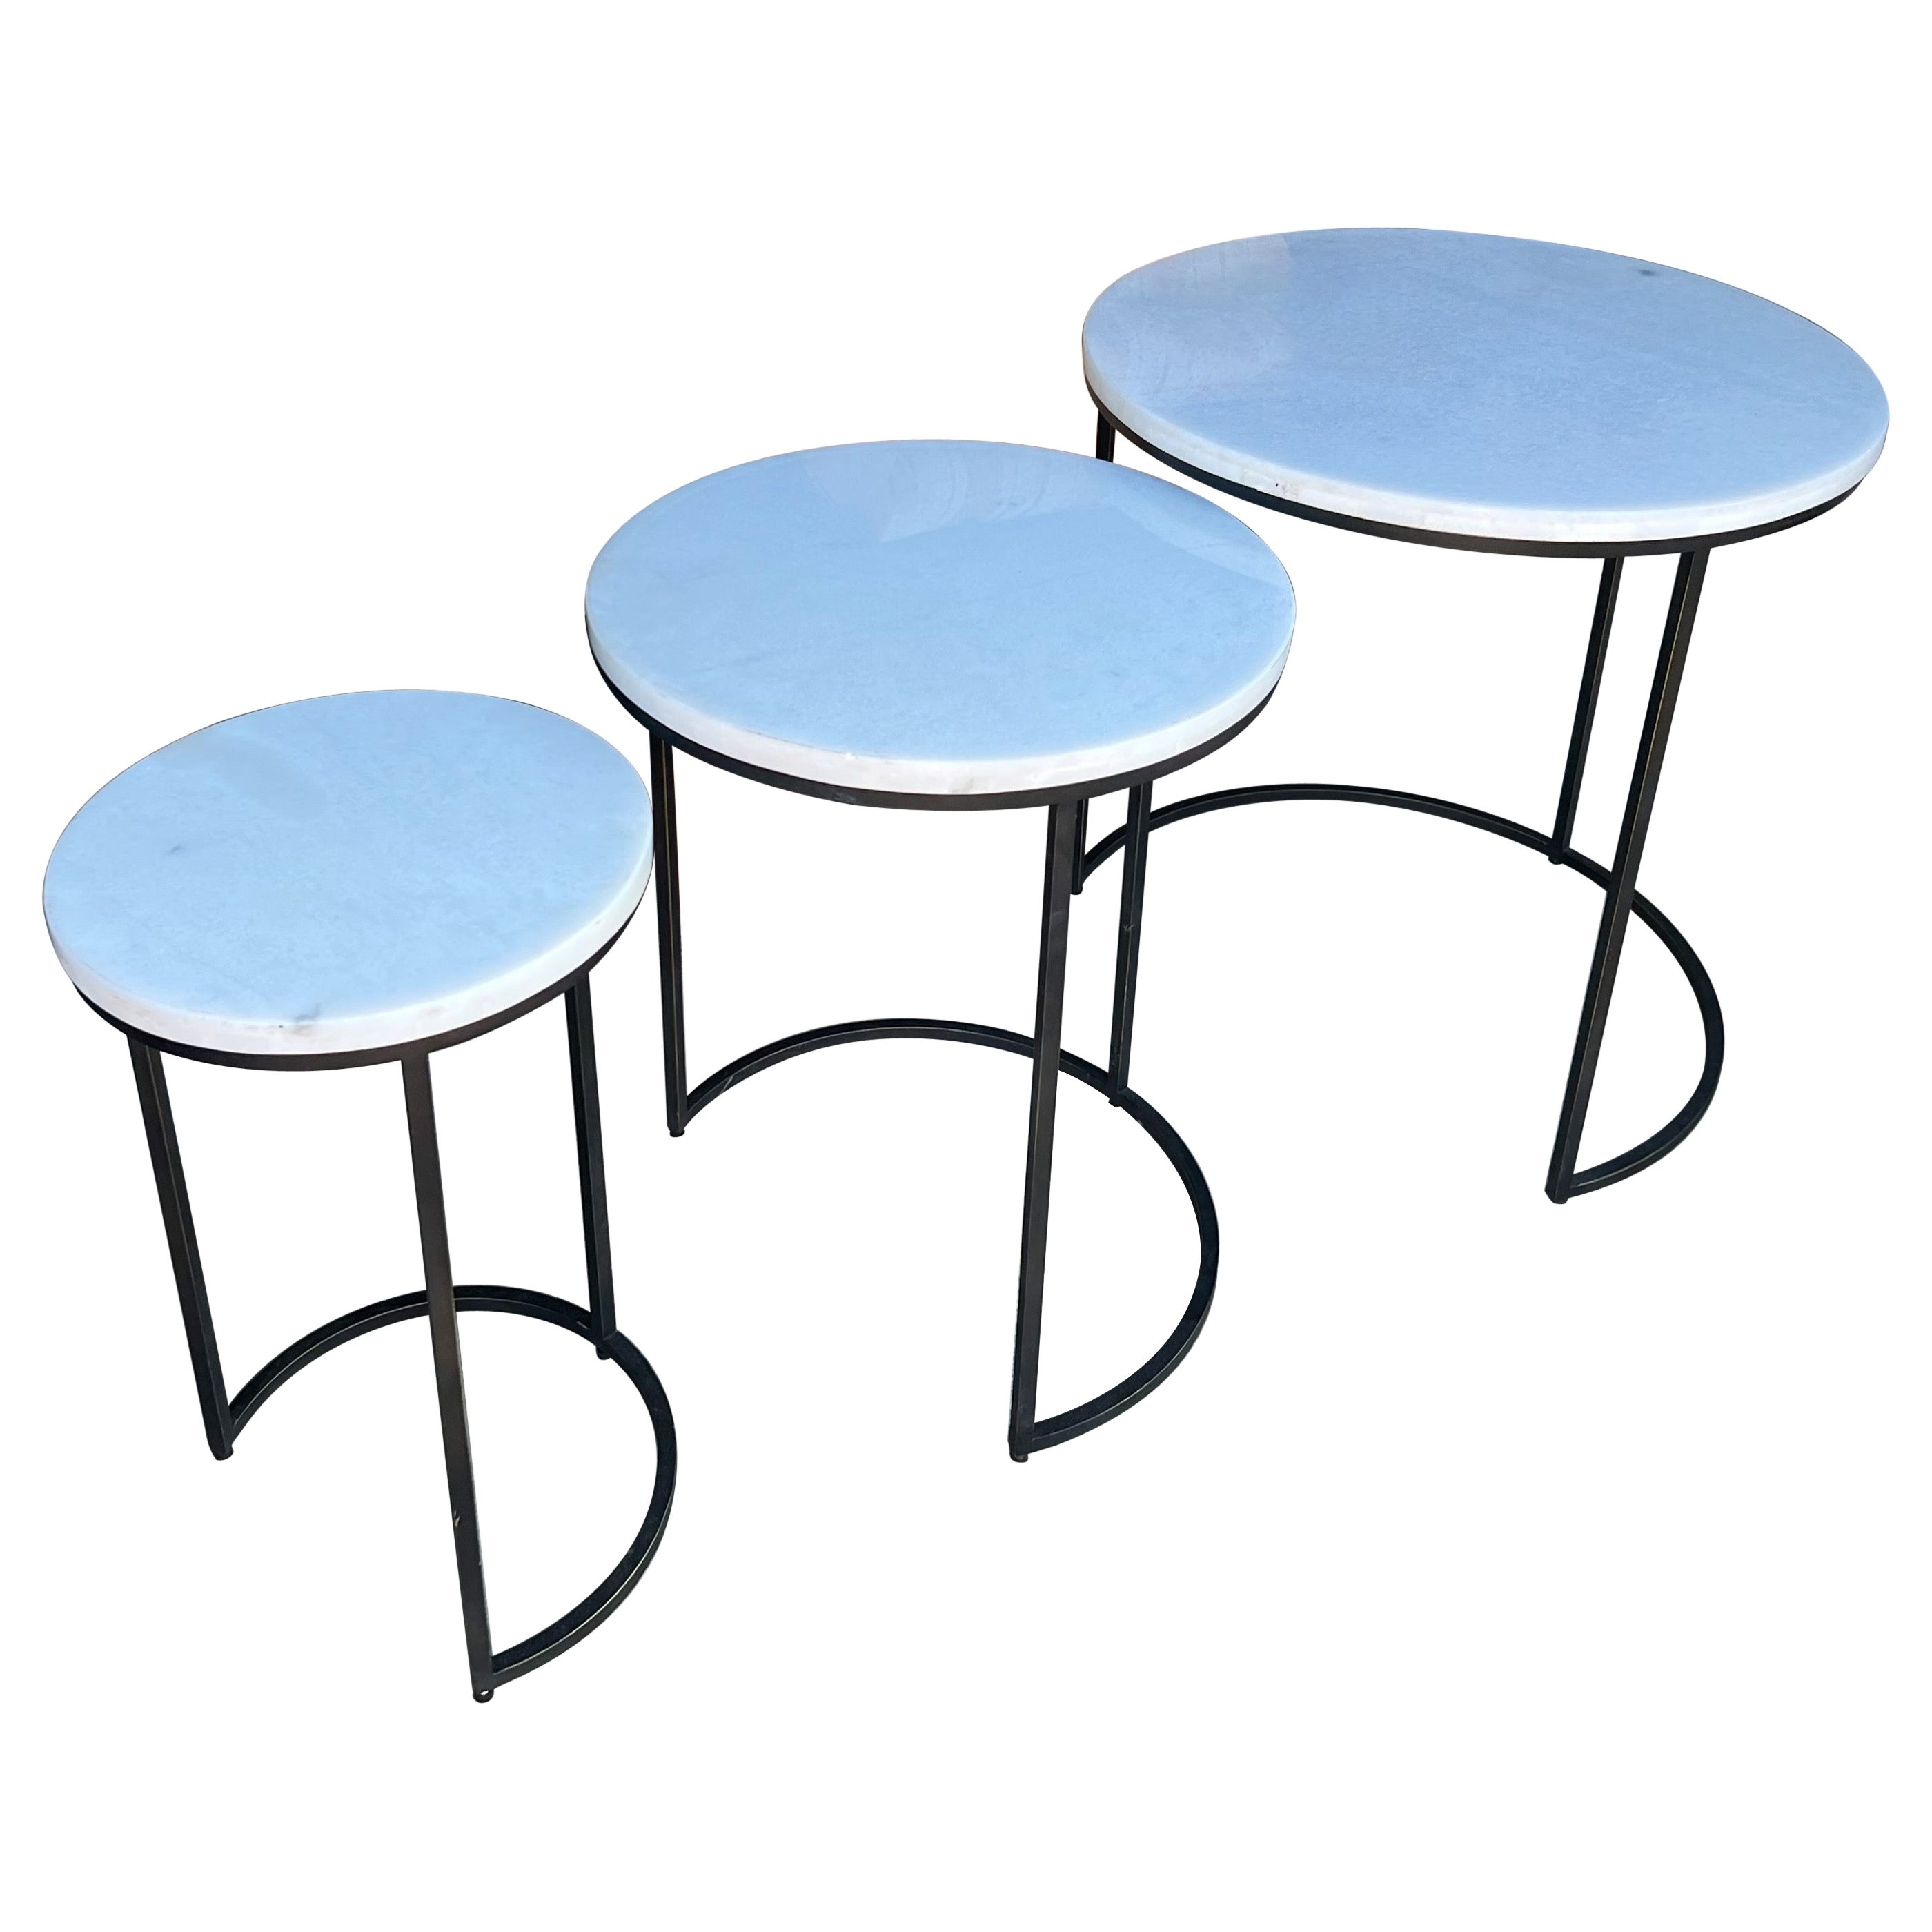 Late 20th-C. Modern Iron & Marble Nesting Tables by Mitchell Gold & Bob William For Sale